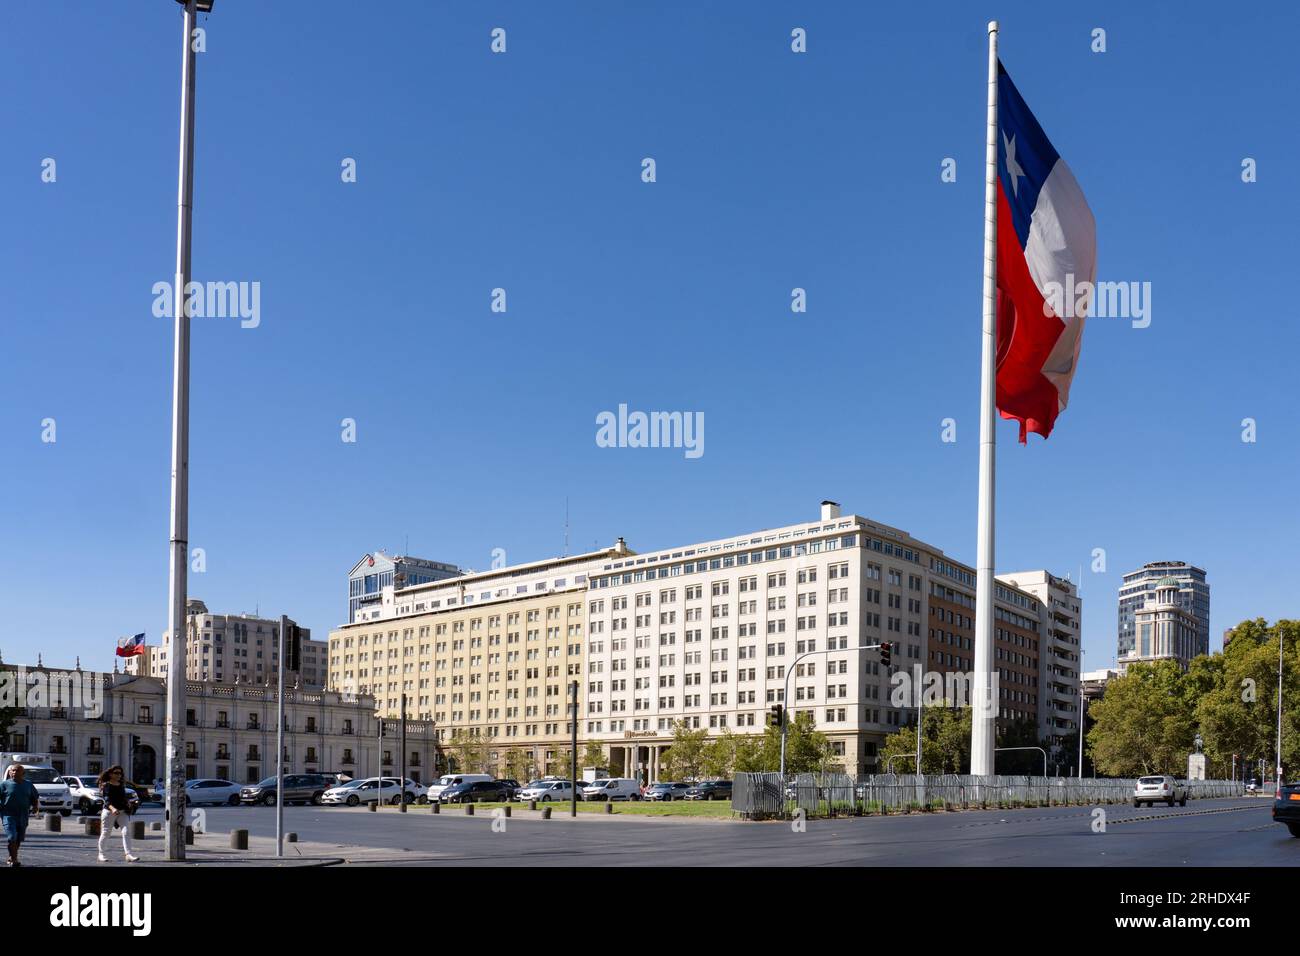 Huge Chilean flag in front of the La Moneda Palace, left, and the Banco Estado building in downtown Santiago, Chile. Stock Photo